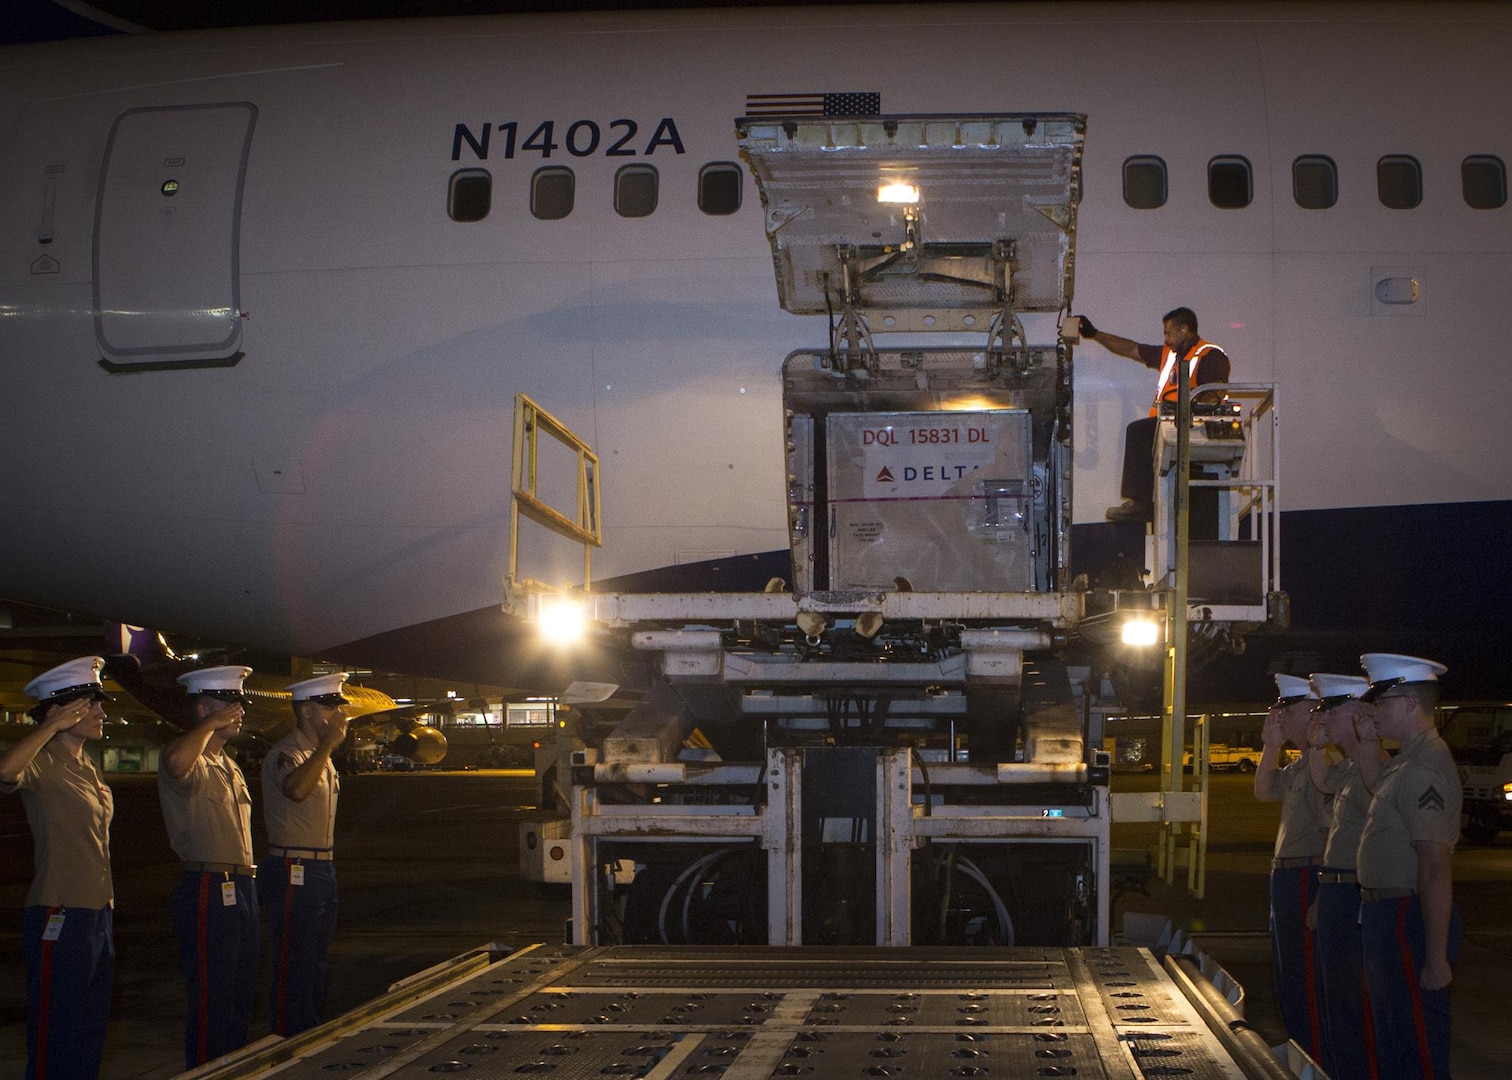 Marines with U.S. Marine Corps Forces, Pacific salute Cpl. Roger K. Nielson during a dignified transfer of remains at the Honolulu International Airport, Nov. 12, 2015. Nielson was a World War II Marine assigned to Company E, 2nd Battalion, 8th Marine Regiment, 2nd Marine Division, who was killed during the battle of Tarawa, where more than 18,000 Marines fought and more than 1,000 were killed over three days of fighting. (U.S. Marine Corps photo by Sgt. Erik Estrada)